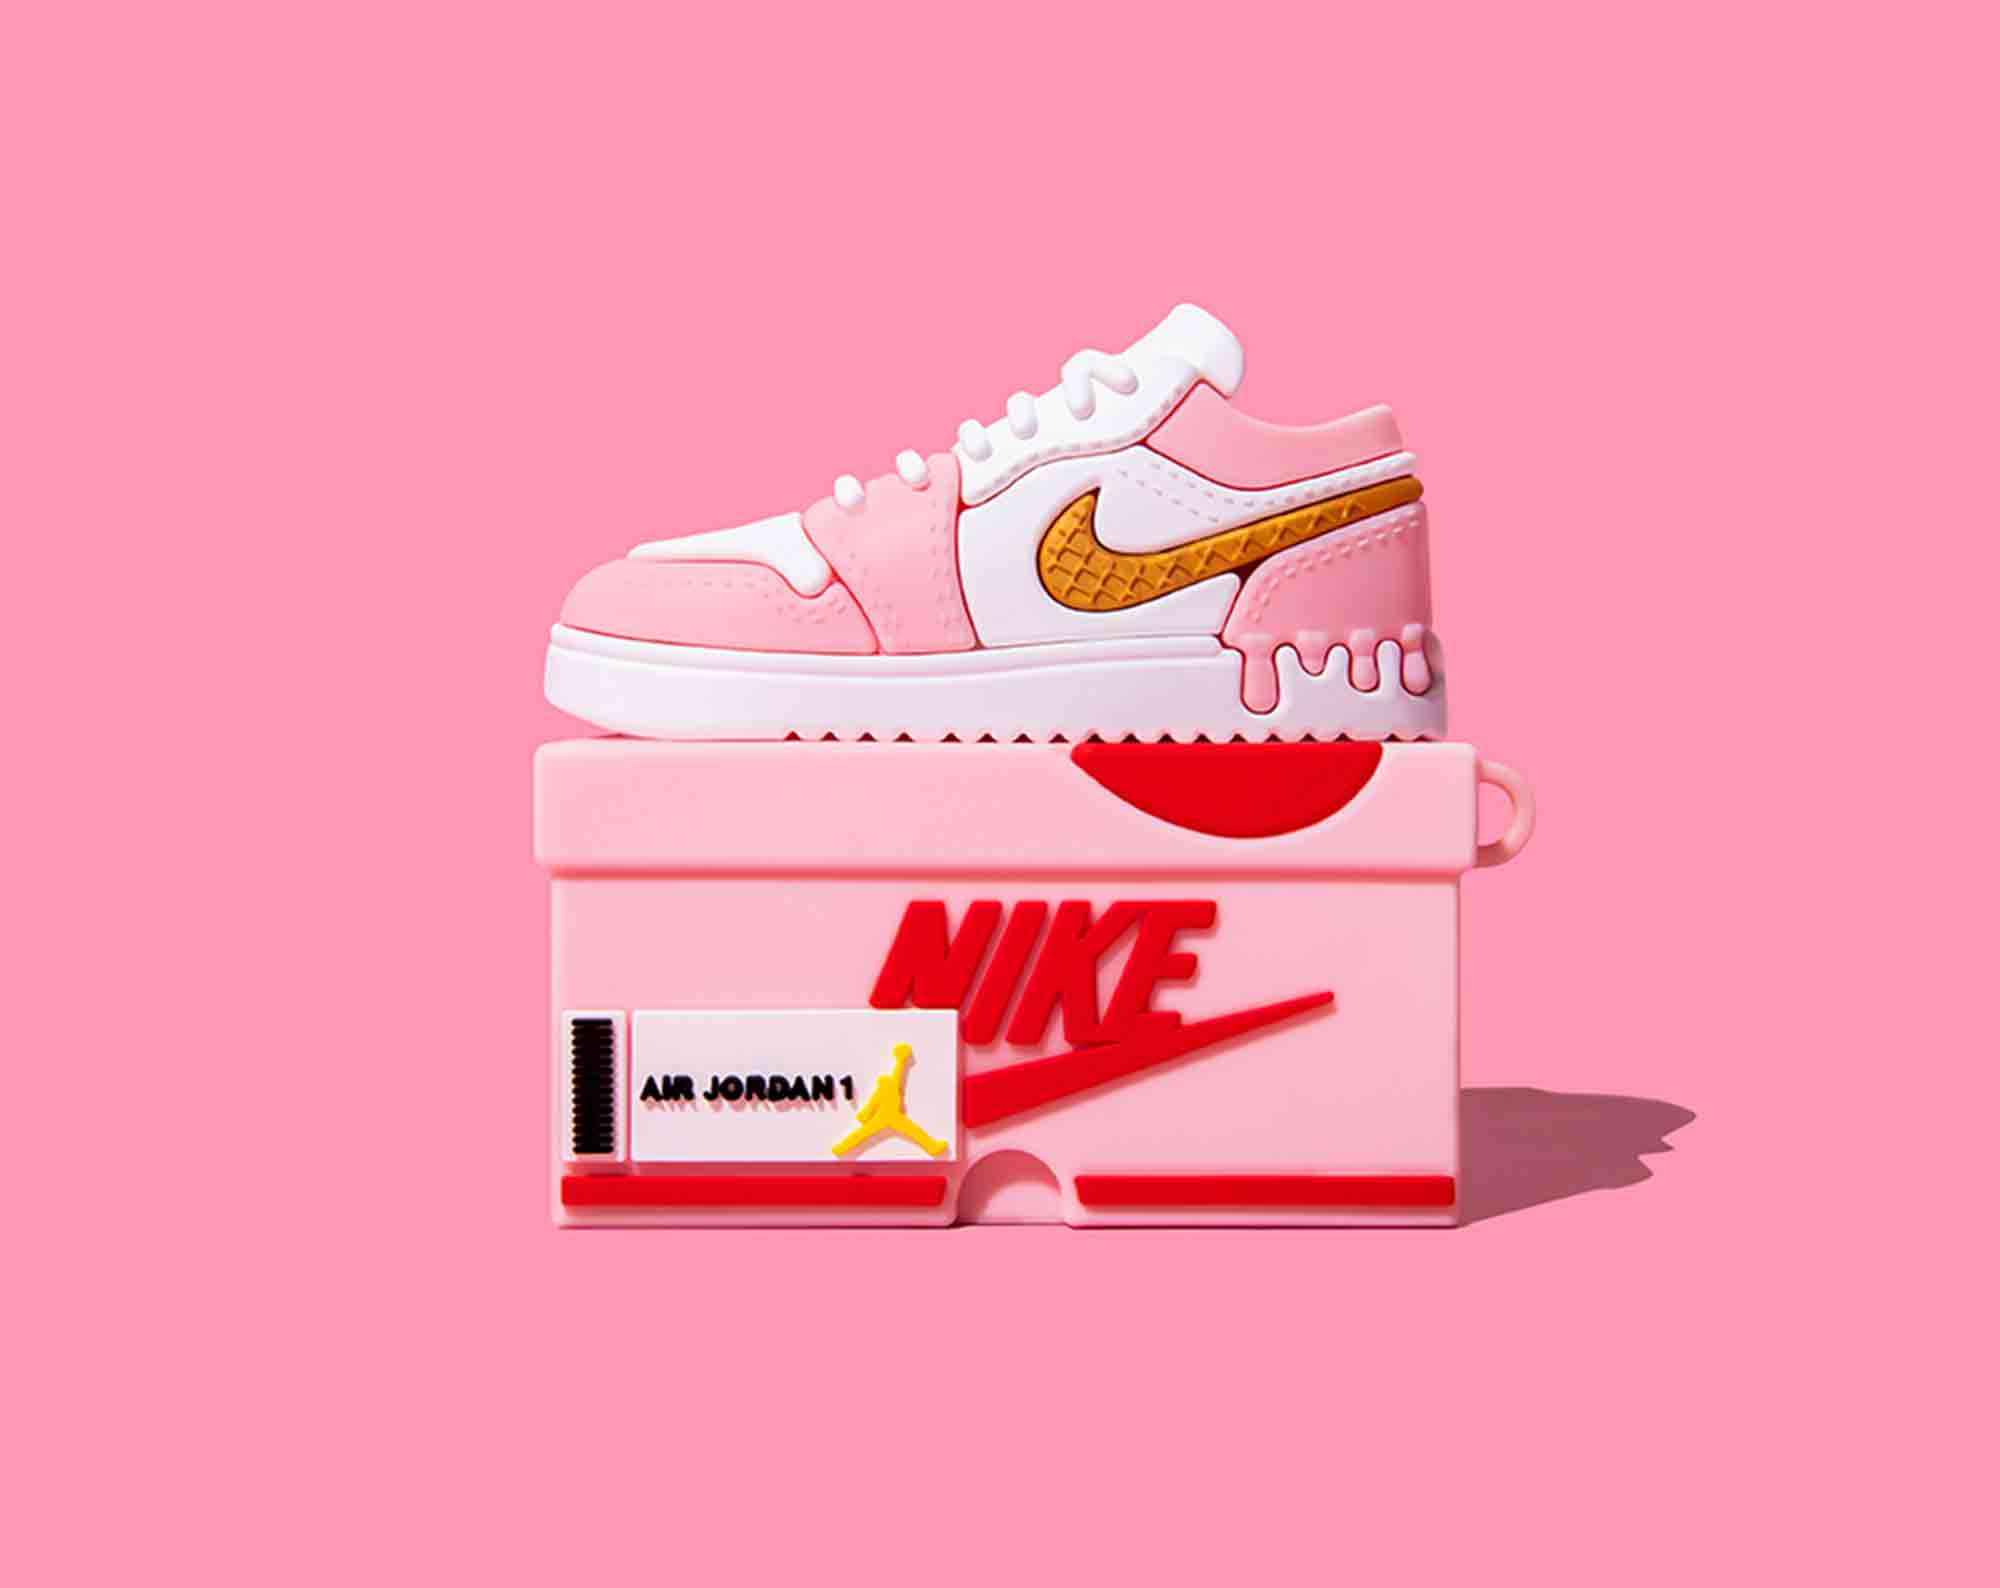 Pink 3D Sneakers AirPods Case